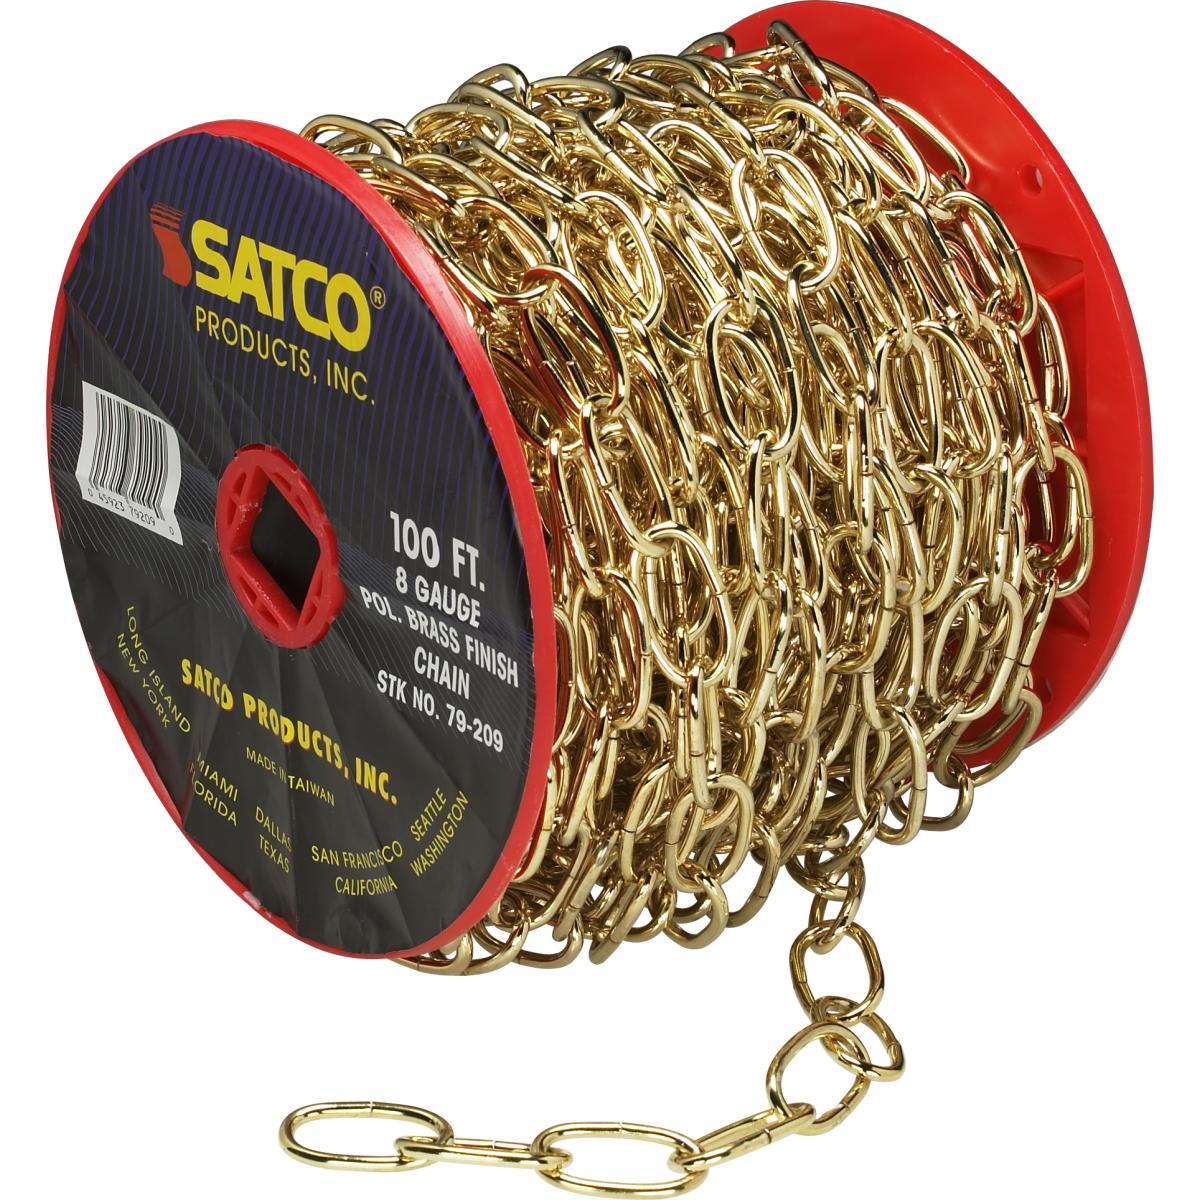 Satco 79-209 8 Ga. Chain Brass Finish 100 ft. to Reel 1 Reel To Master 35lbs Max